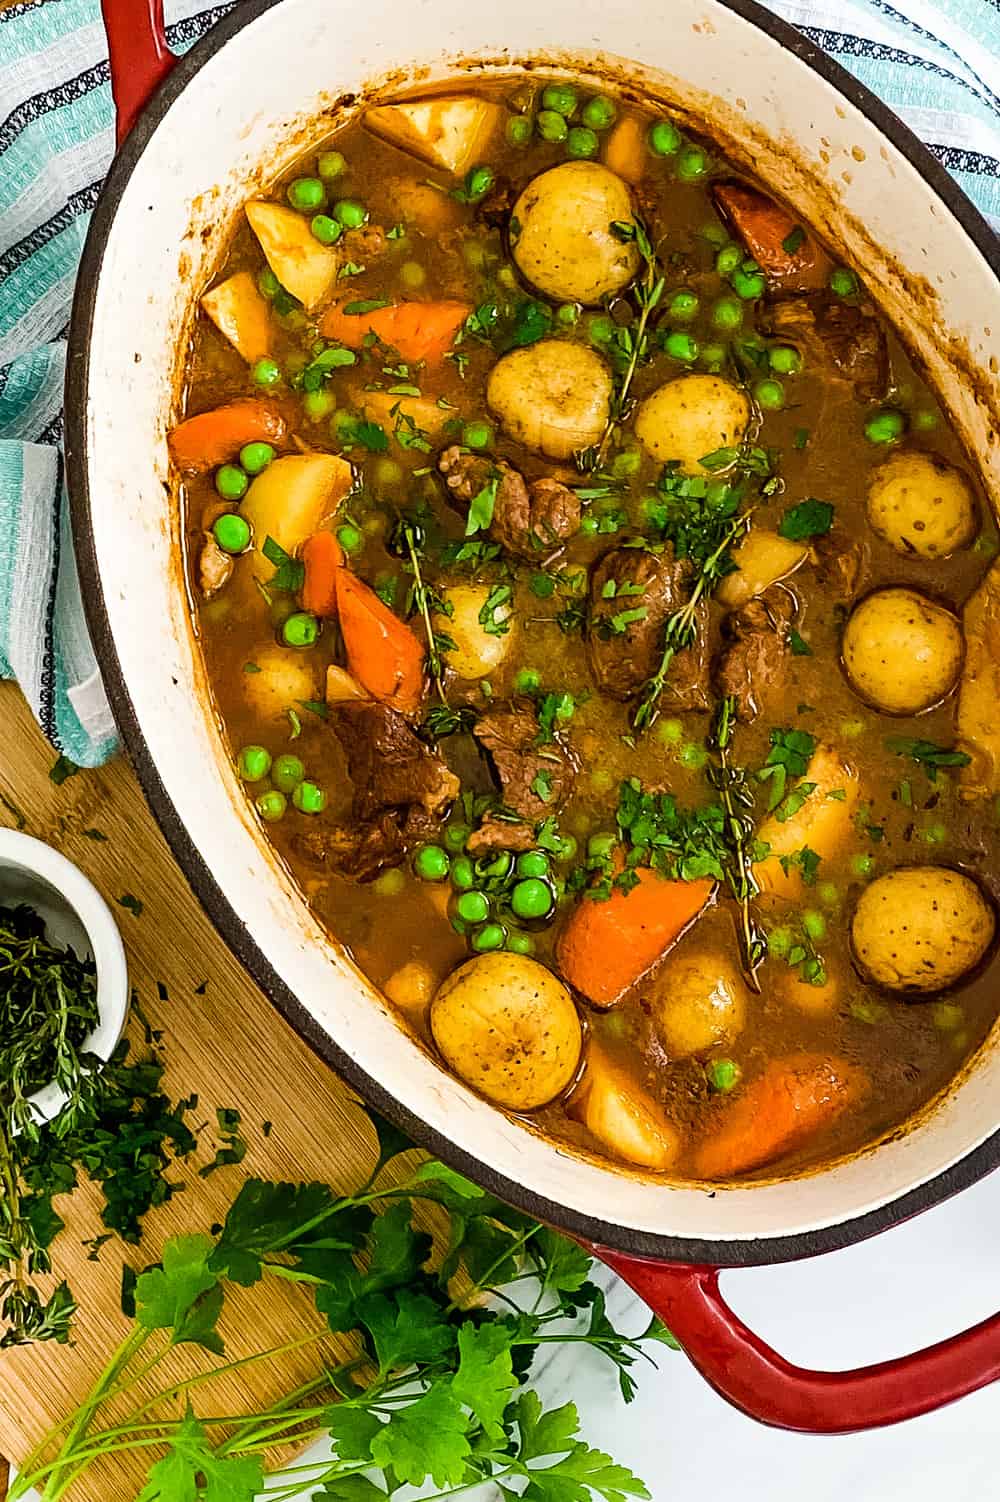 Dutch oven with stew with potatoes, carrots and lamb